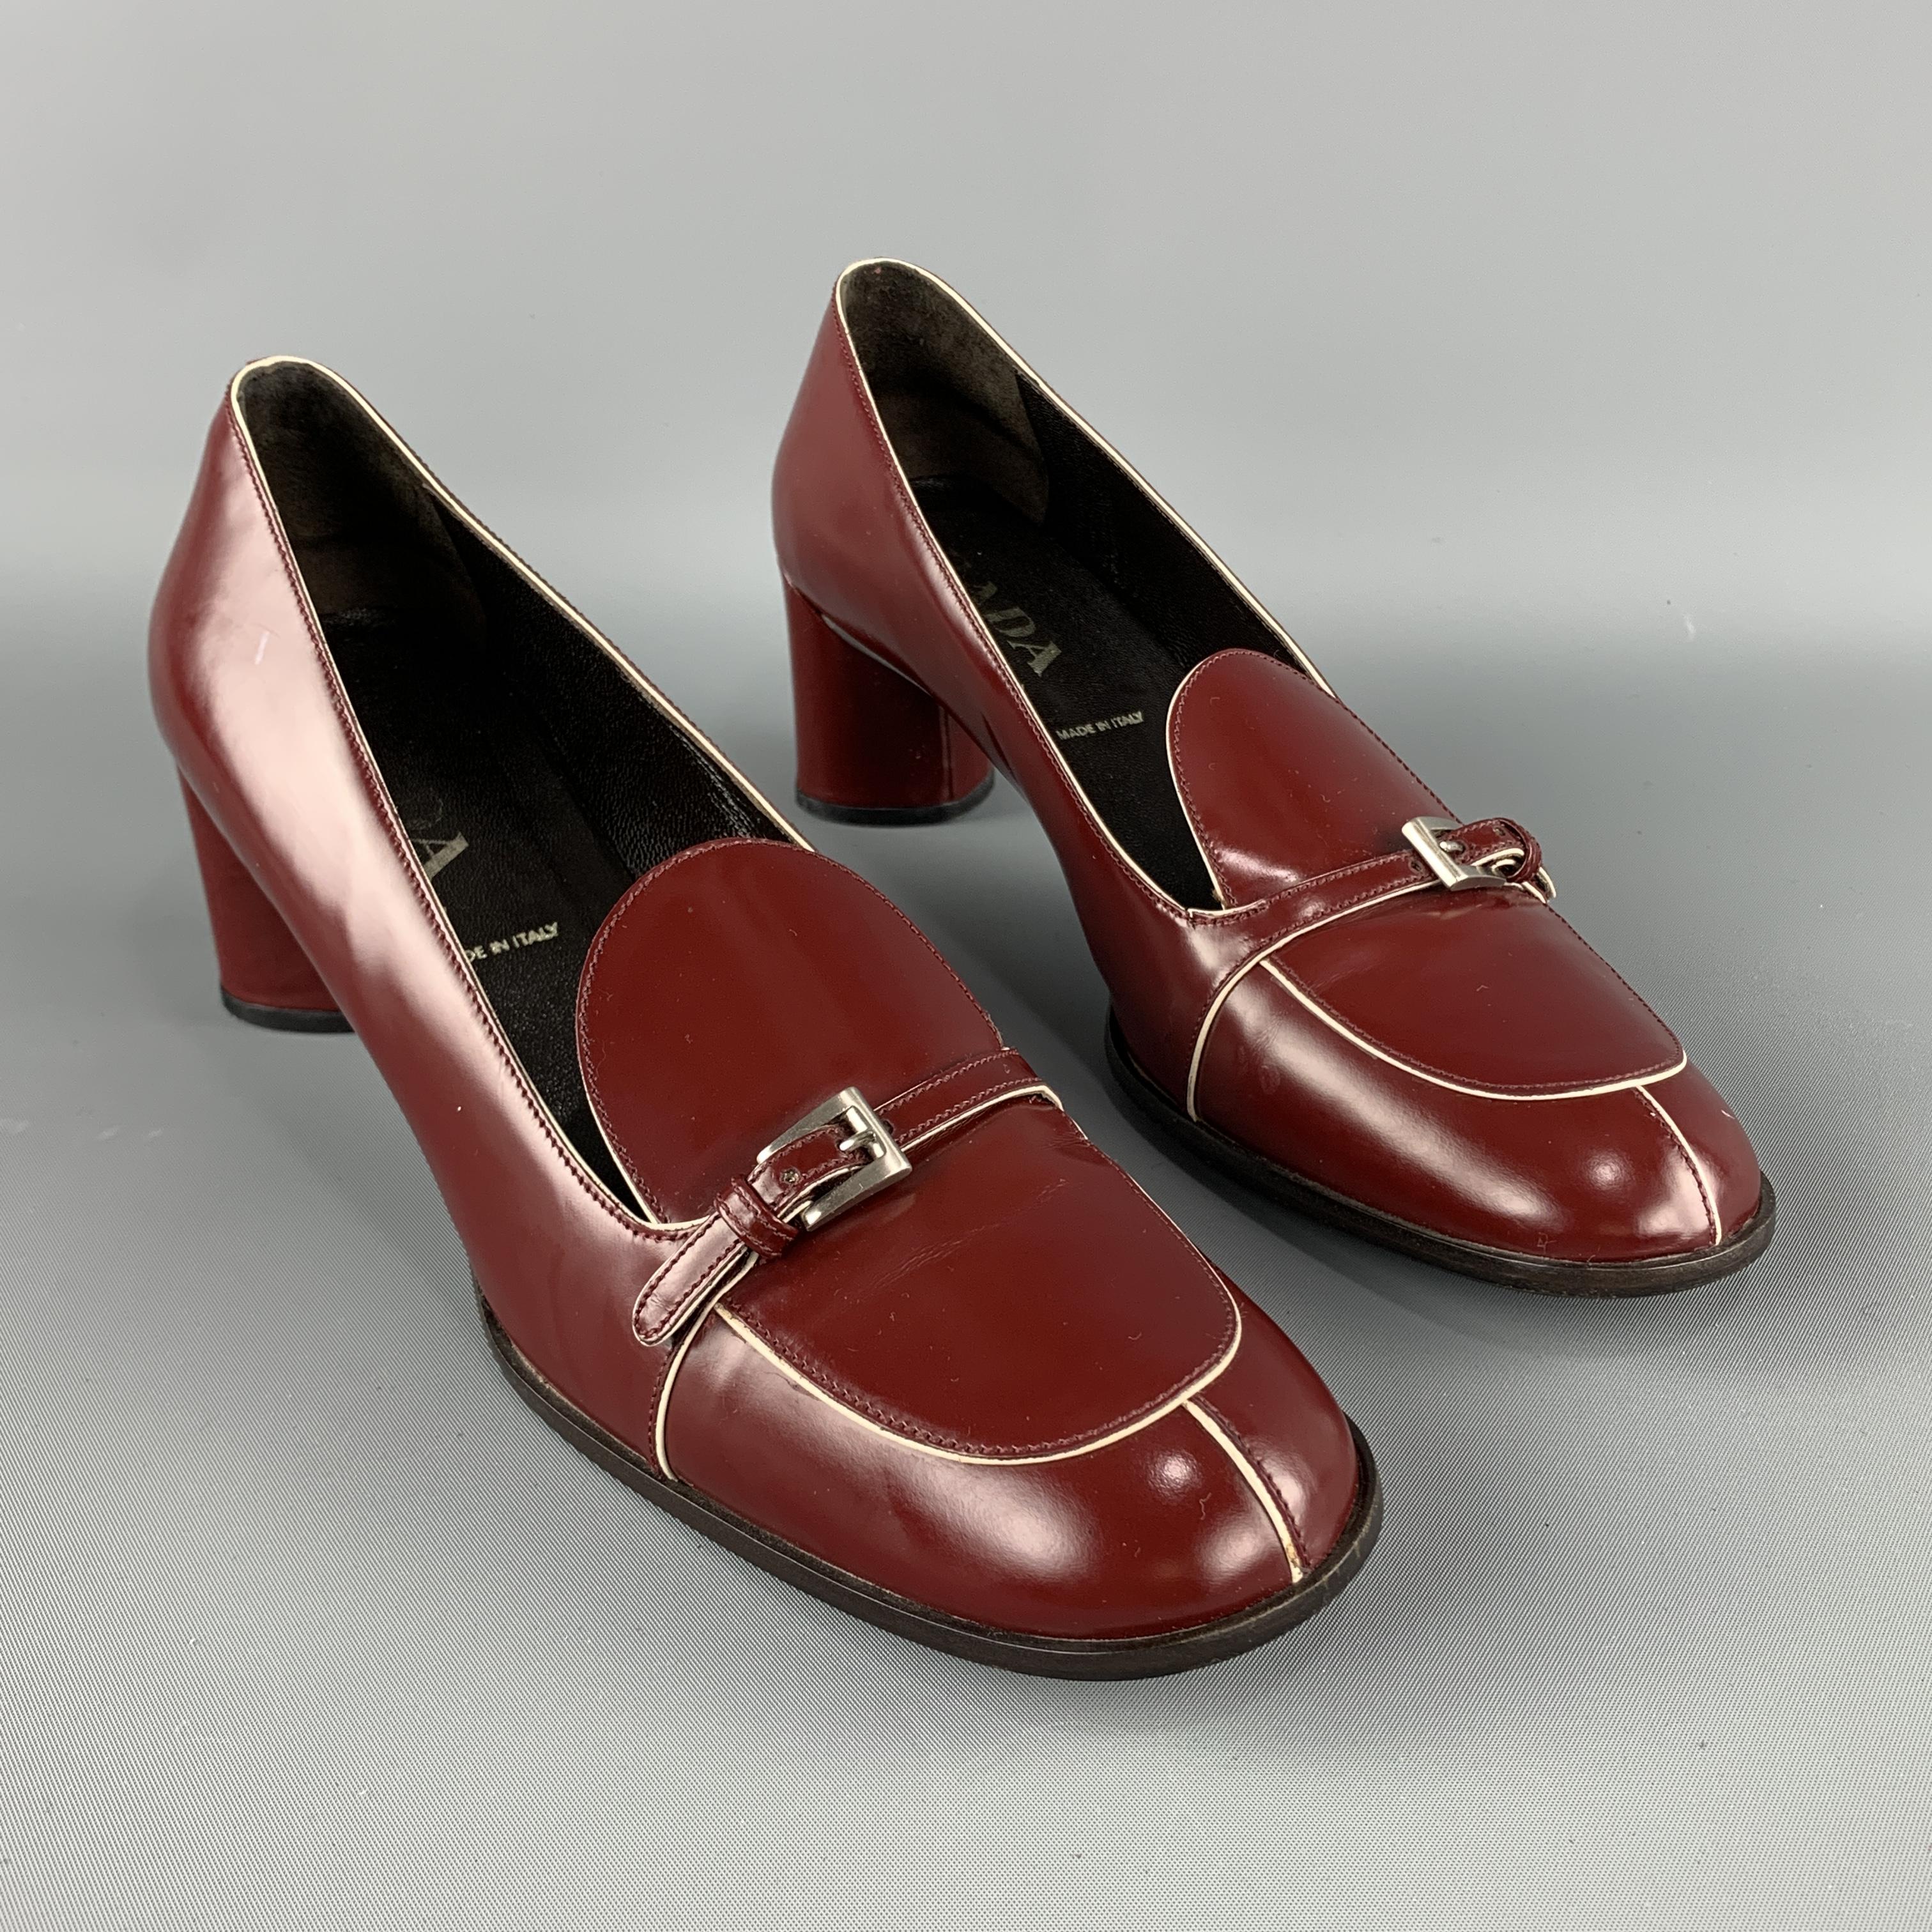 PRADA Loafer Pumps comes in a burgundy tone in a solid leather material, with a rounded toe and a silver tone metal buckle. Made in Italy.
 
Excellent Pre-Owned Condition.
Marked: IT 39 1/2
 
Heel: 2.2 in.